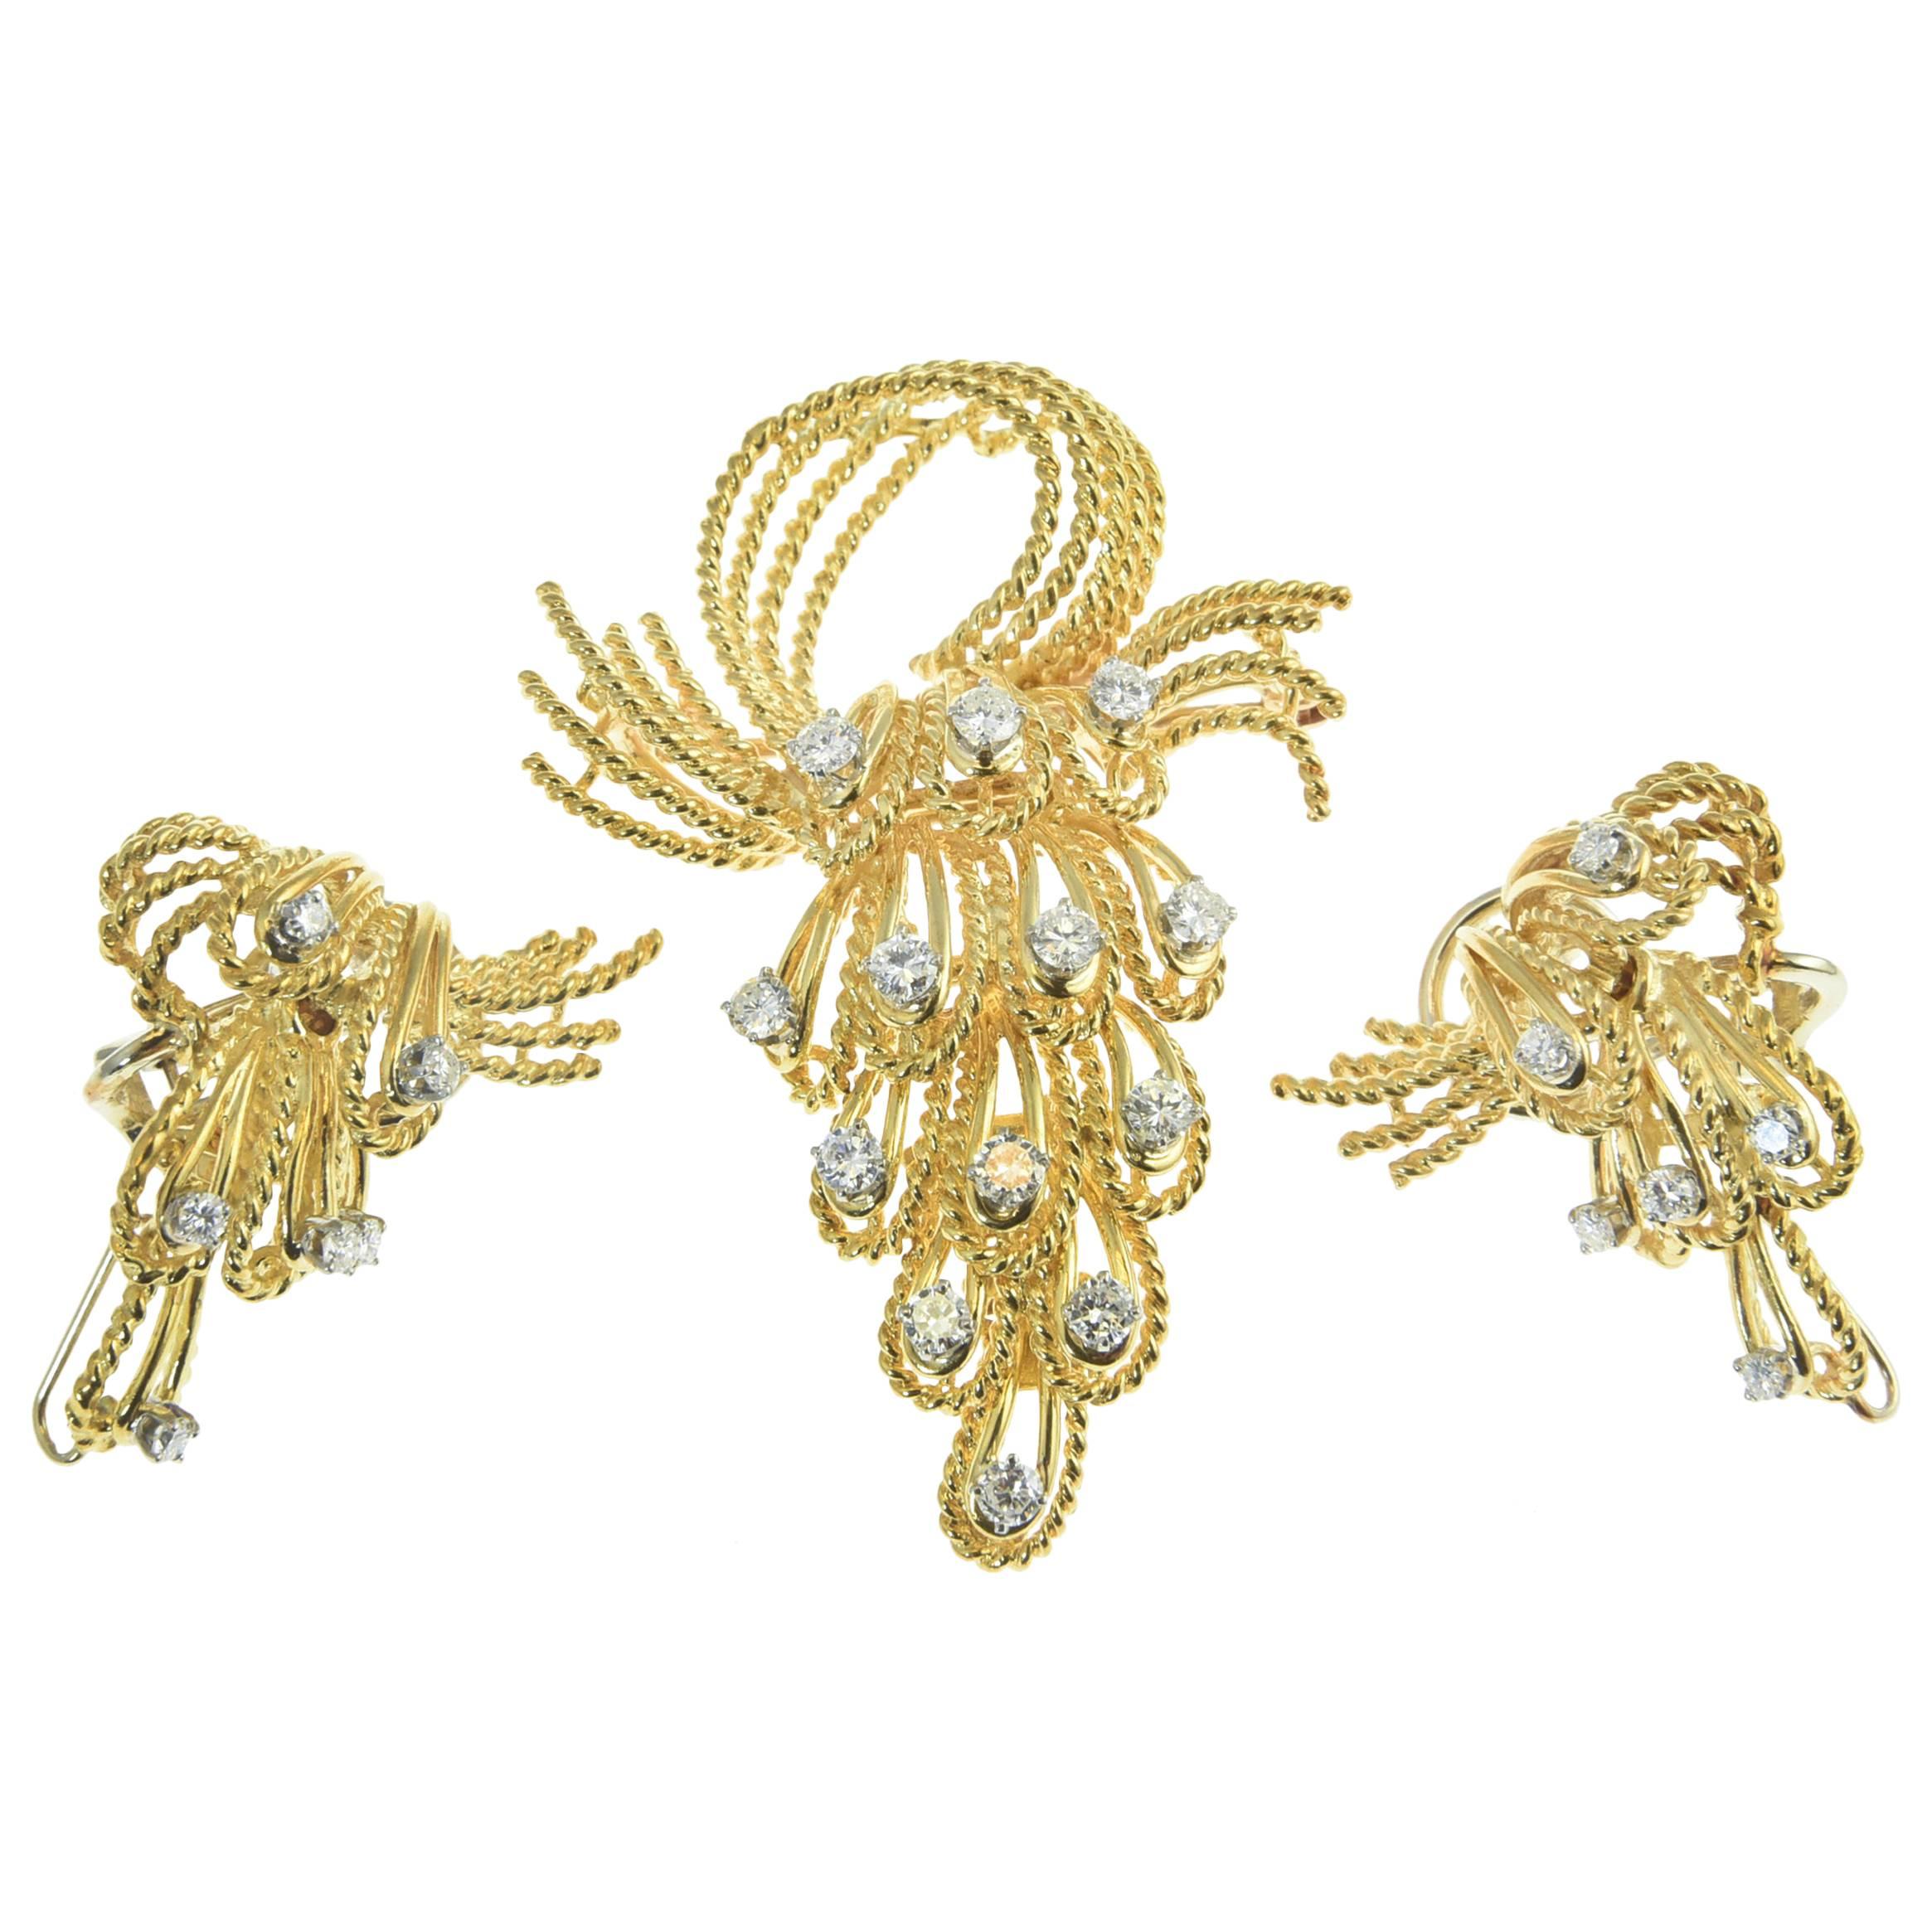 French Articulated Twisted Diamond Gold Cascade Brooch and Earrings Suite